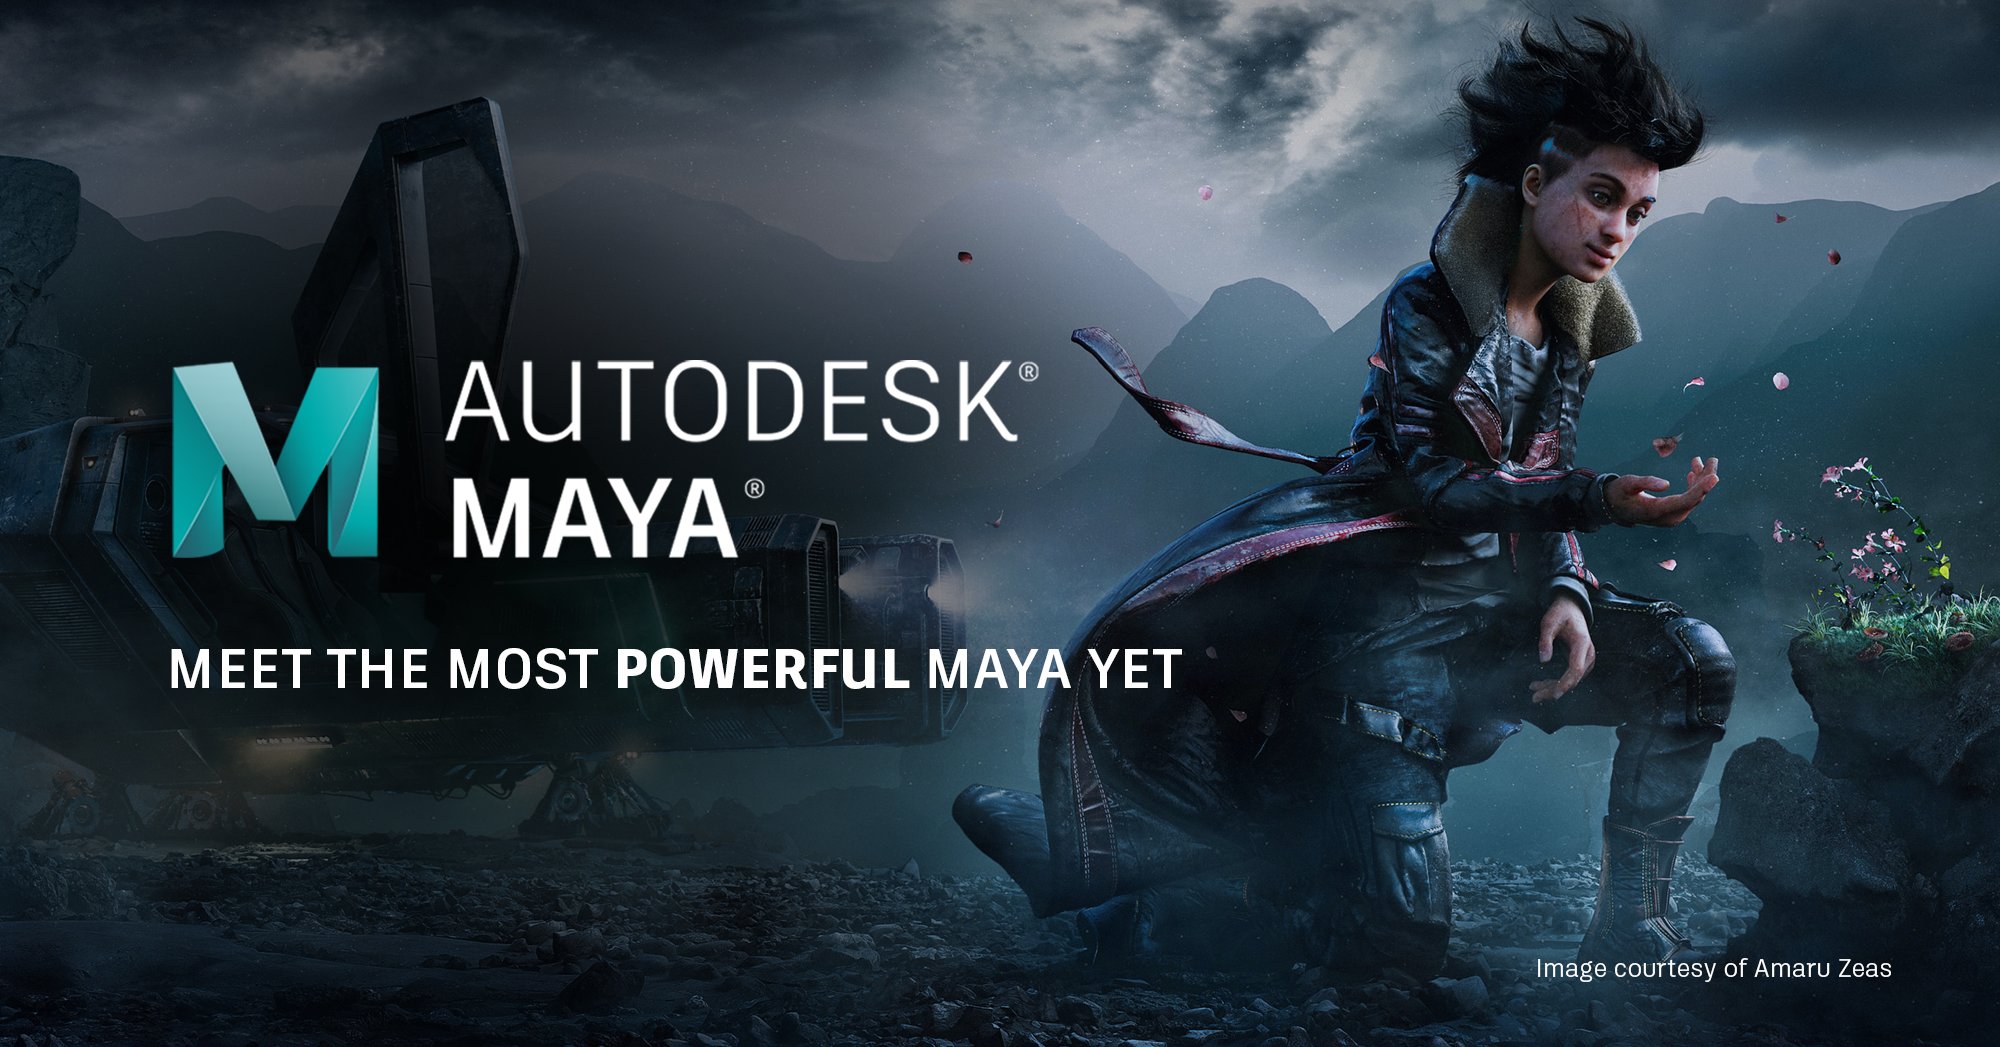 Autodesk Maya on Twitter: "Meet the most powerful Maya yet. ⚡🤝#USD is now fully integrated in Maya empowering you to work more efficiently and collaboratively. Check out all the significant updates to